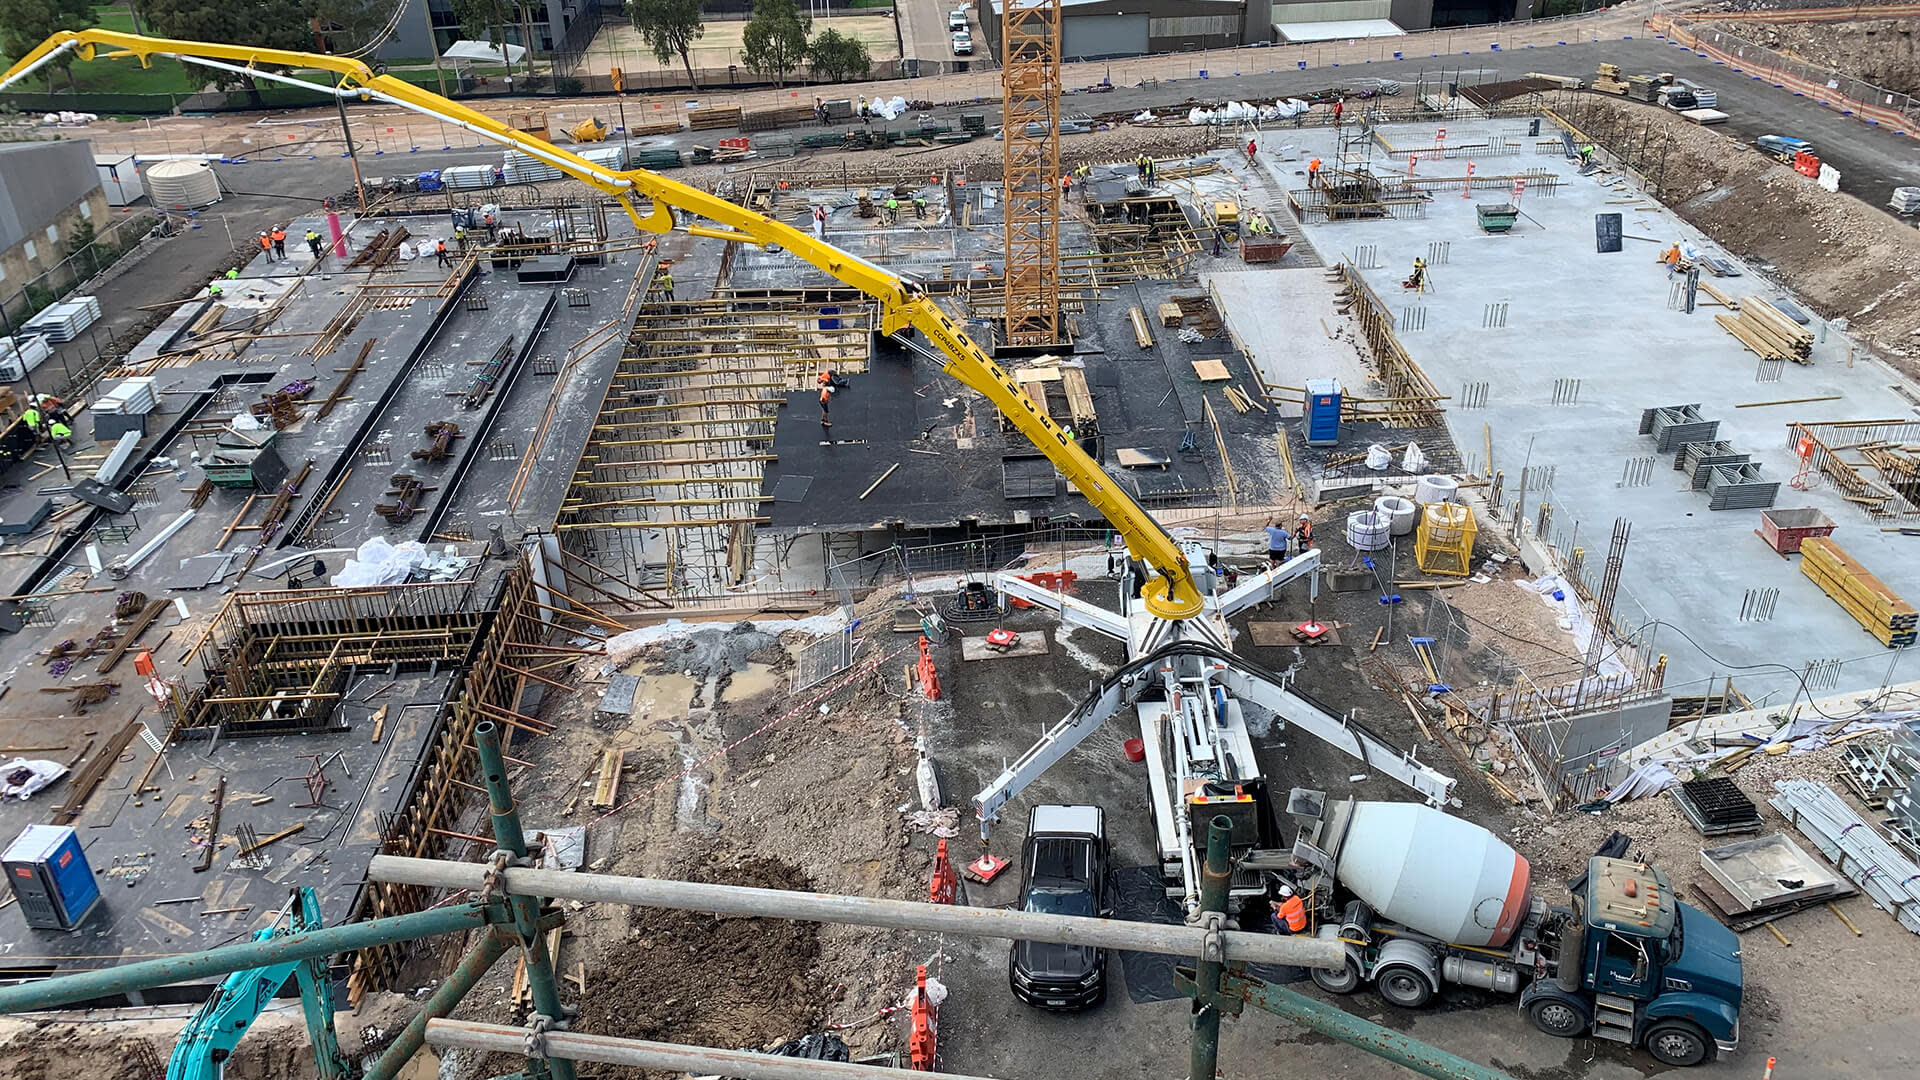 Birdseye view of a construction site with a large crane in the middle